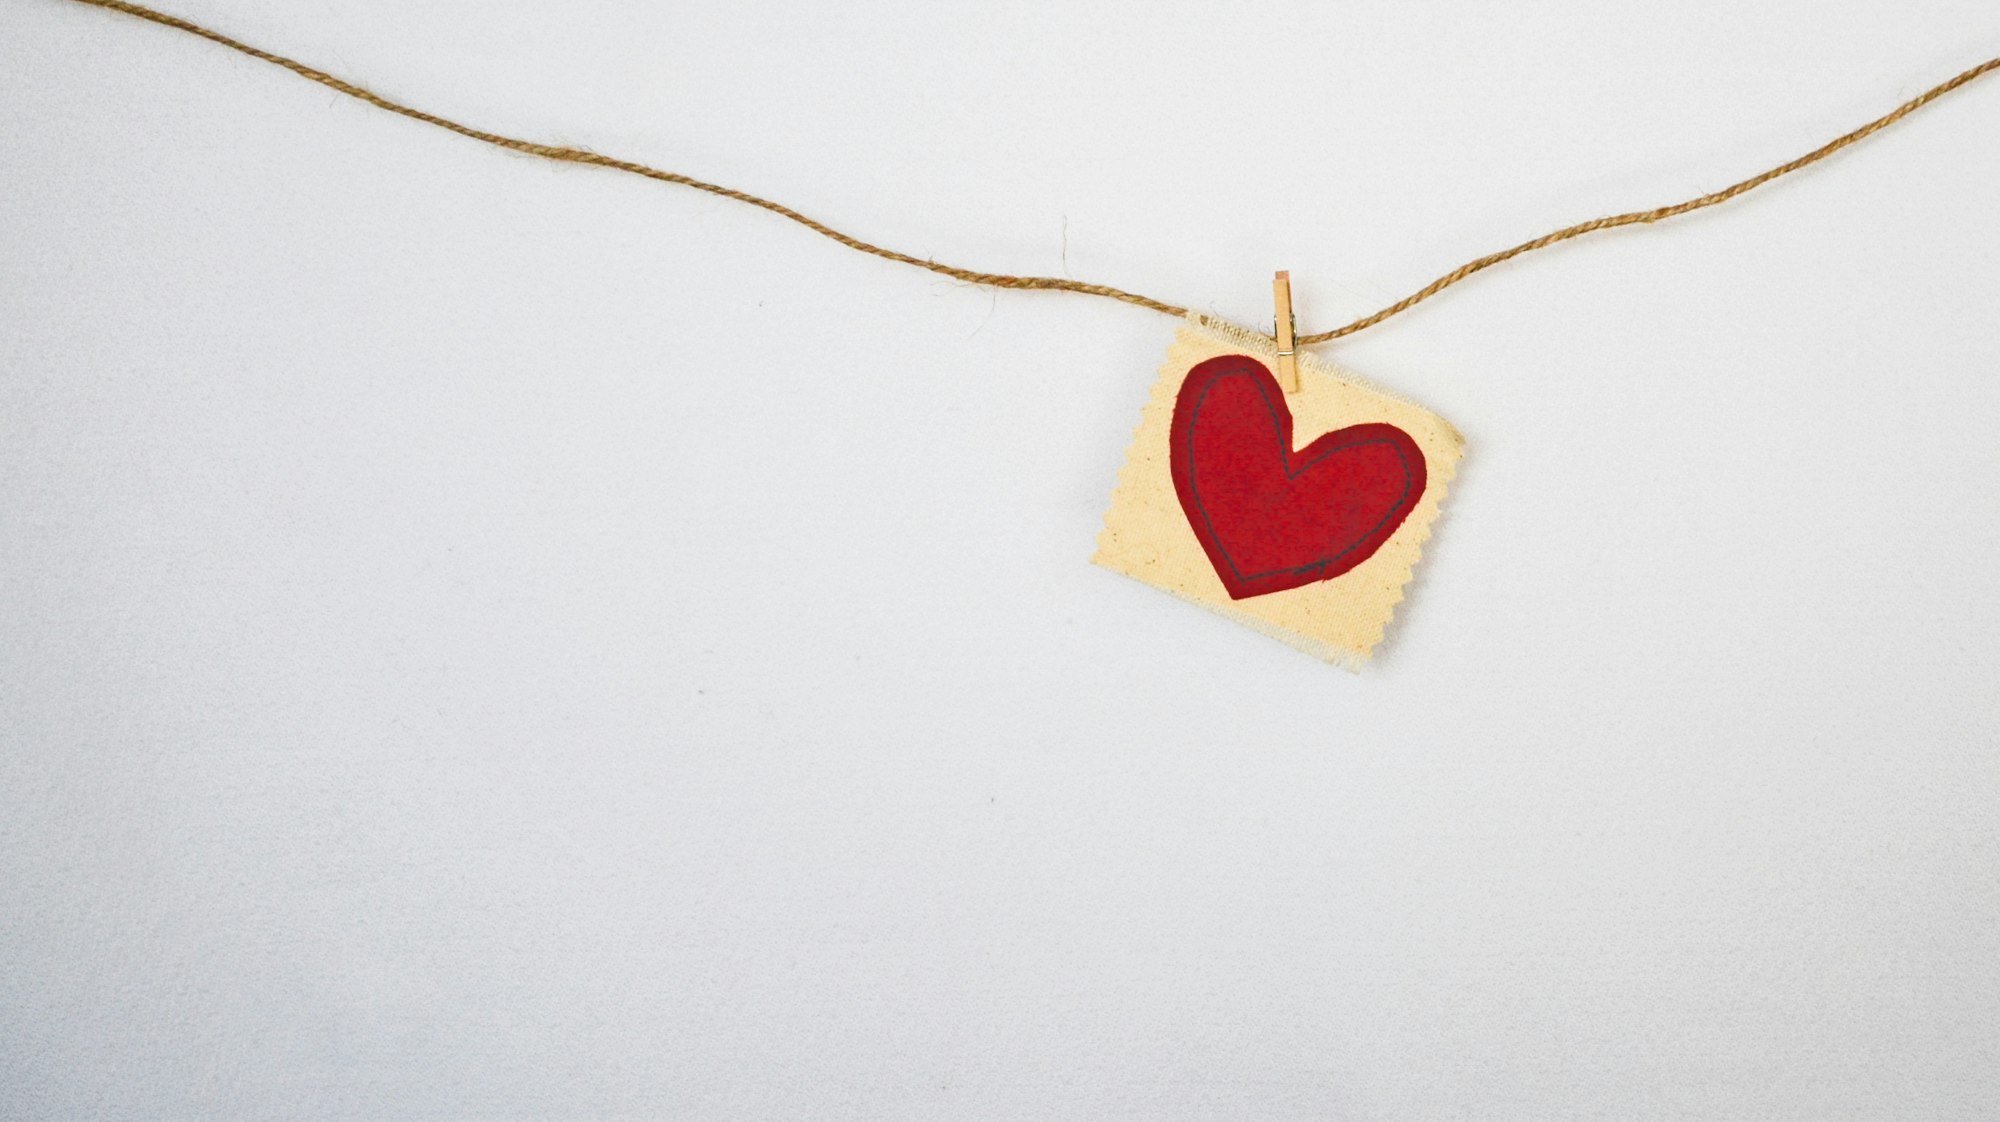 Mixing a couple of my favorite hobbies: photography and making things like cute little hearts.